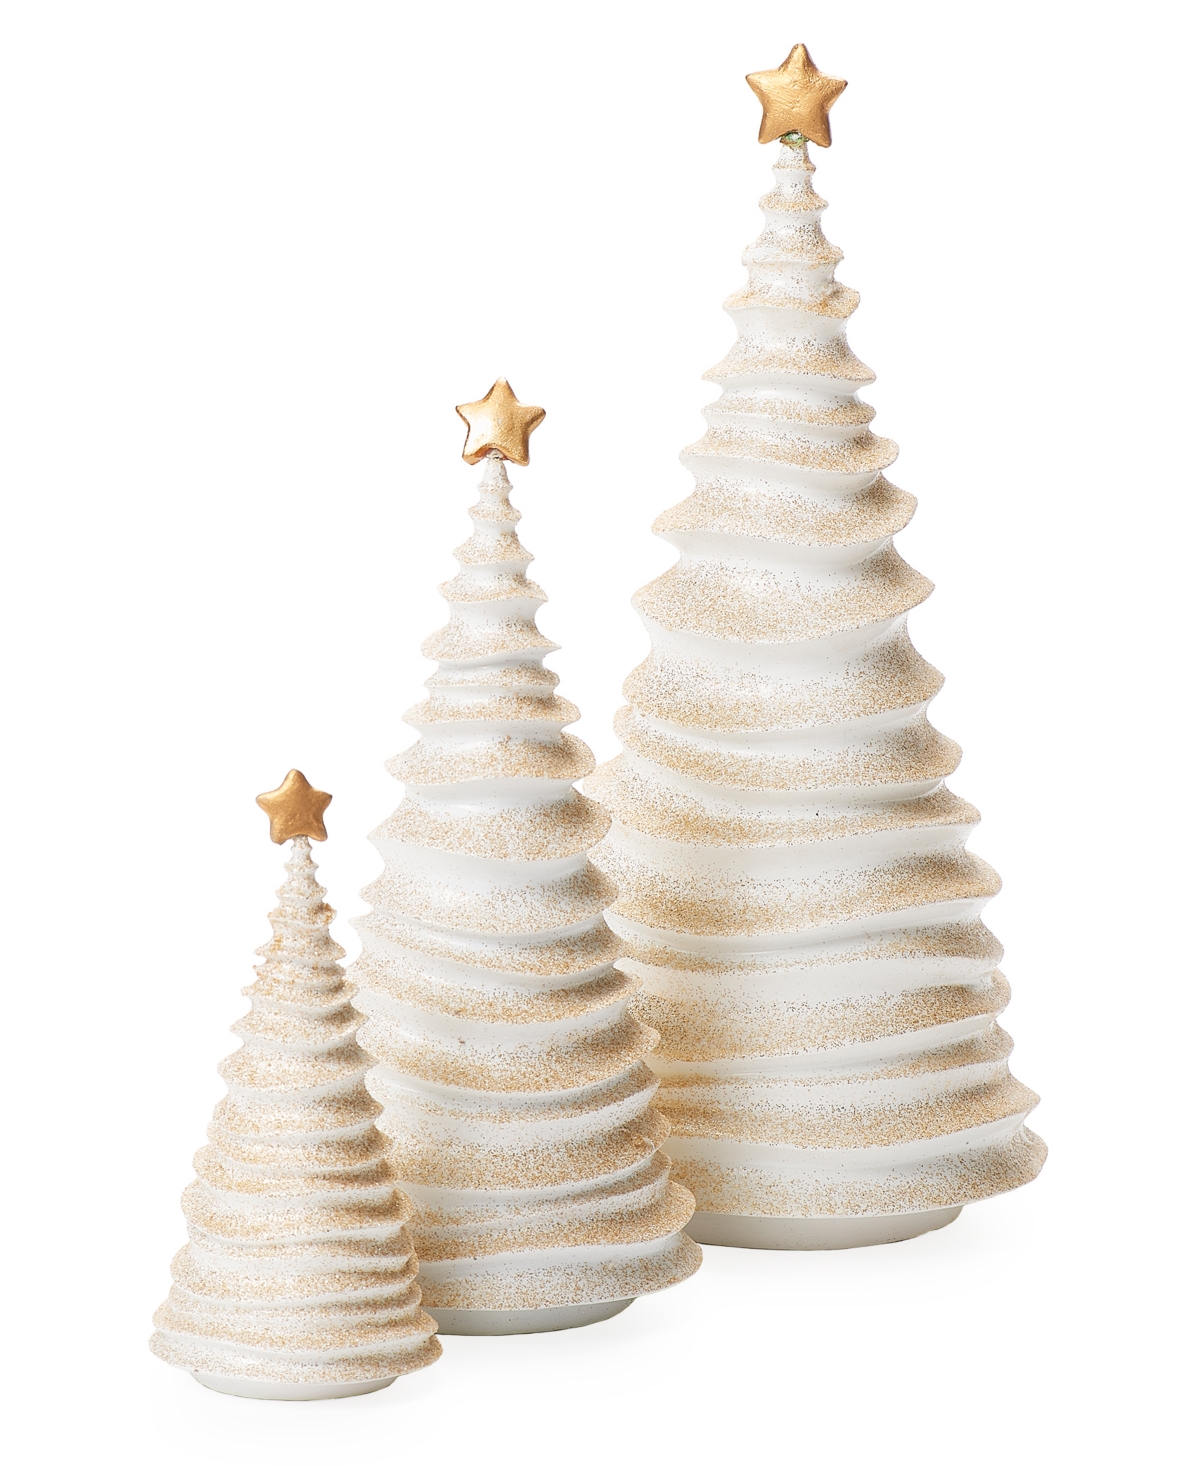 Roman 6-13.5" H 3 Piece Set Frosting Trees In Multi Color